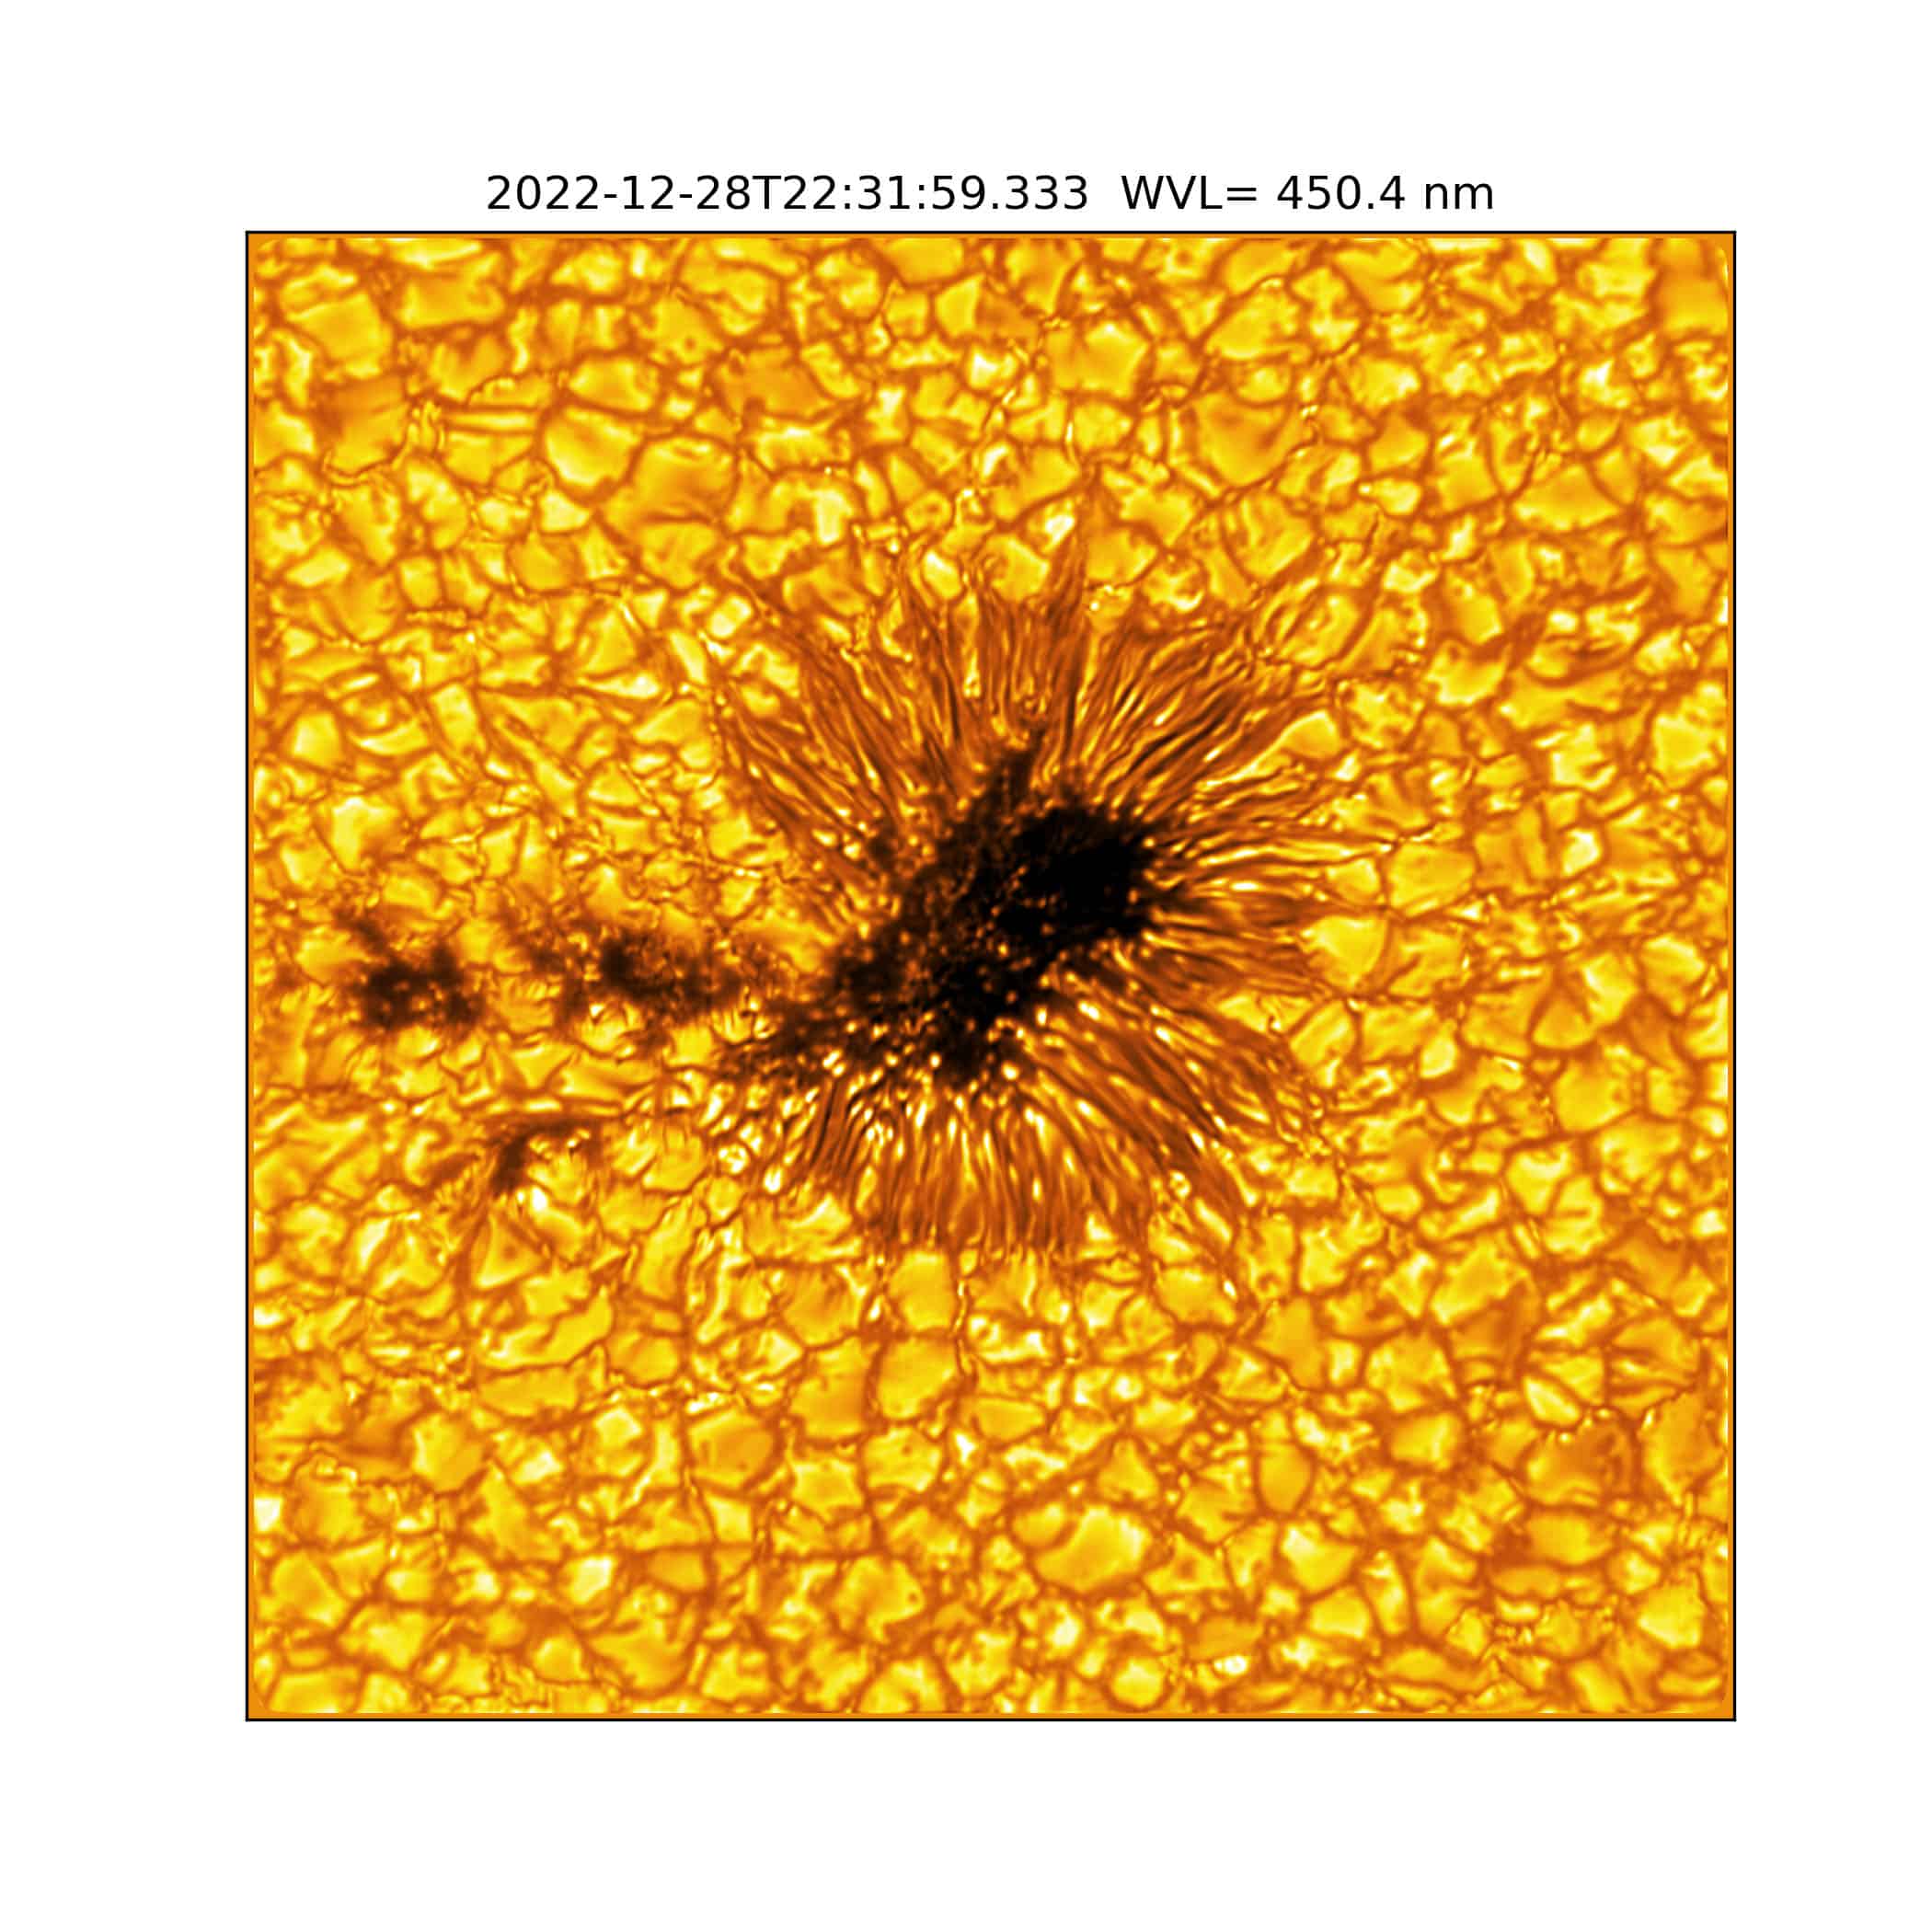 A sunspot is identifiable by its dark, central umbra and surrounding filamentary-structured penumbra. A closer look reveals the presence of nearby umbral fragments - essentially, a sunspot that’s lost its penumbra. These fragments were previously a part of the neighboring sunspot, suggesting that this may be the “end phase” of a sunspot’s evolution. While this image shows the presence of umbral fragments, it is extraordinarily rare to capture the process of a penumbra forming or decaying. Umbra: Dark, central region of a sunspot where the magnetic field is strongest. Penumbra: The brighter, surrounding region of a sunspot’s umbra characterized by bright filamentary structures. Image Title: Umbral Fragments Suggest the “End Phase” of a Sunspot PID: PID_1_22 Large Field of View: 30,720km x 30,720km Image Credit: NSF/AURA/NSO Image Processing: Friedrich Wöger(NSO), Catherine Fischer (NSO) Science Credit: Jaime de la Cruz Rodriguez (Stockholm University)